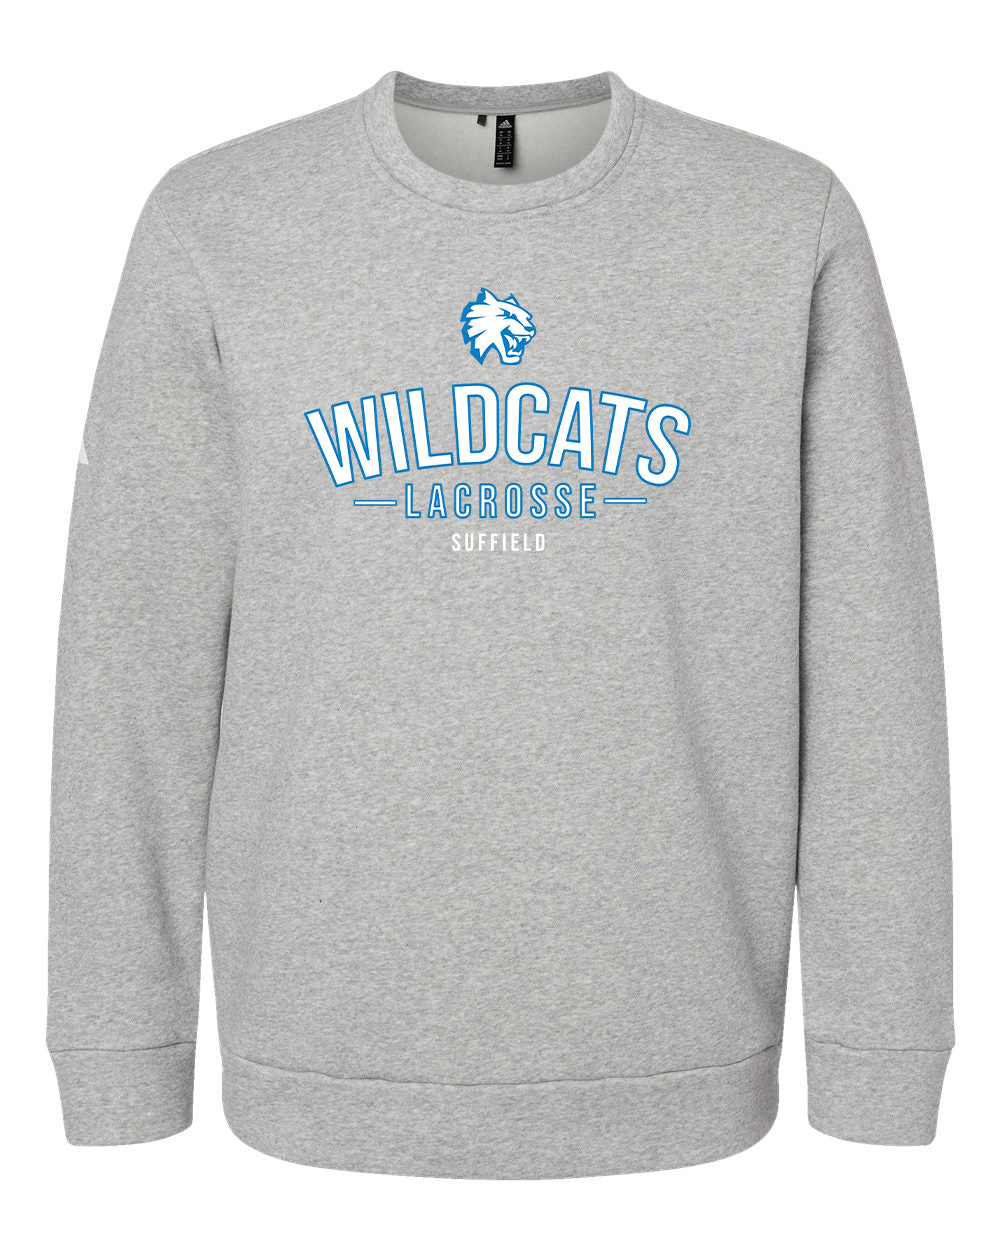 Suffield Youth Lacrosse - Adult Adidas Crewneck "Classic" - A434 (color options available)